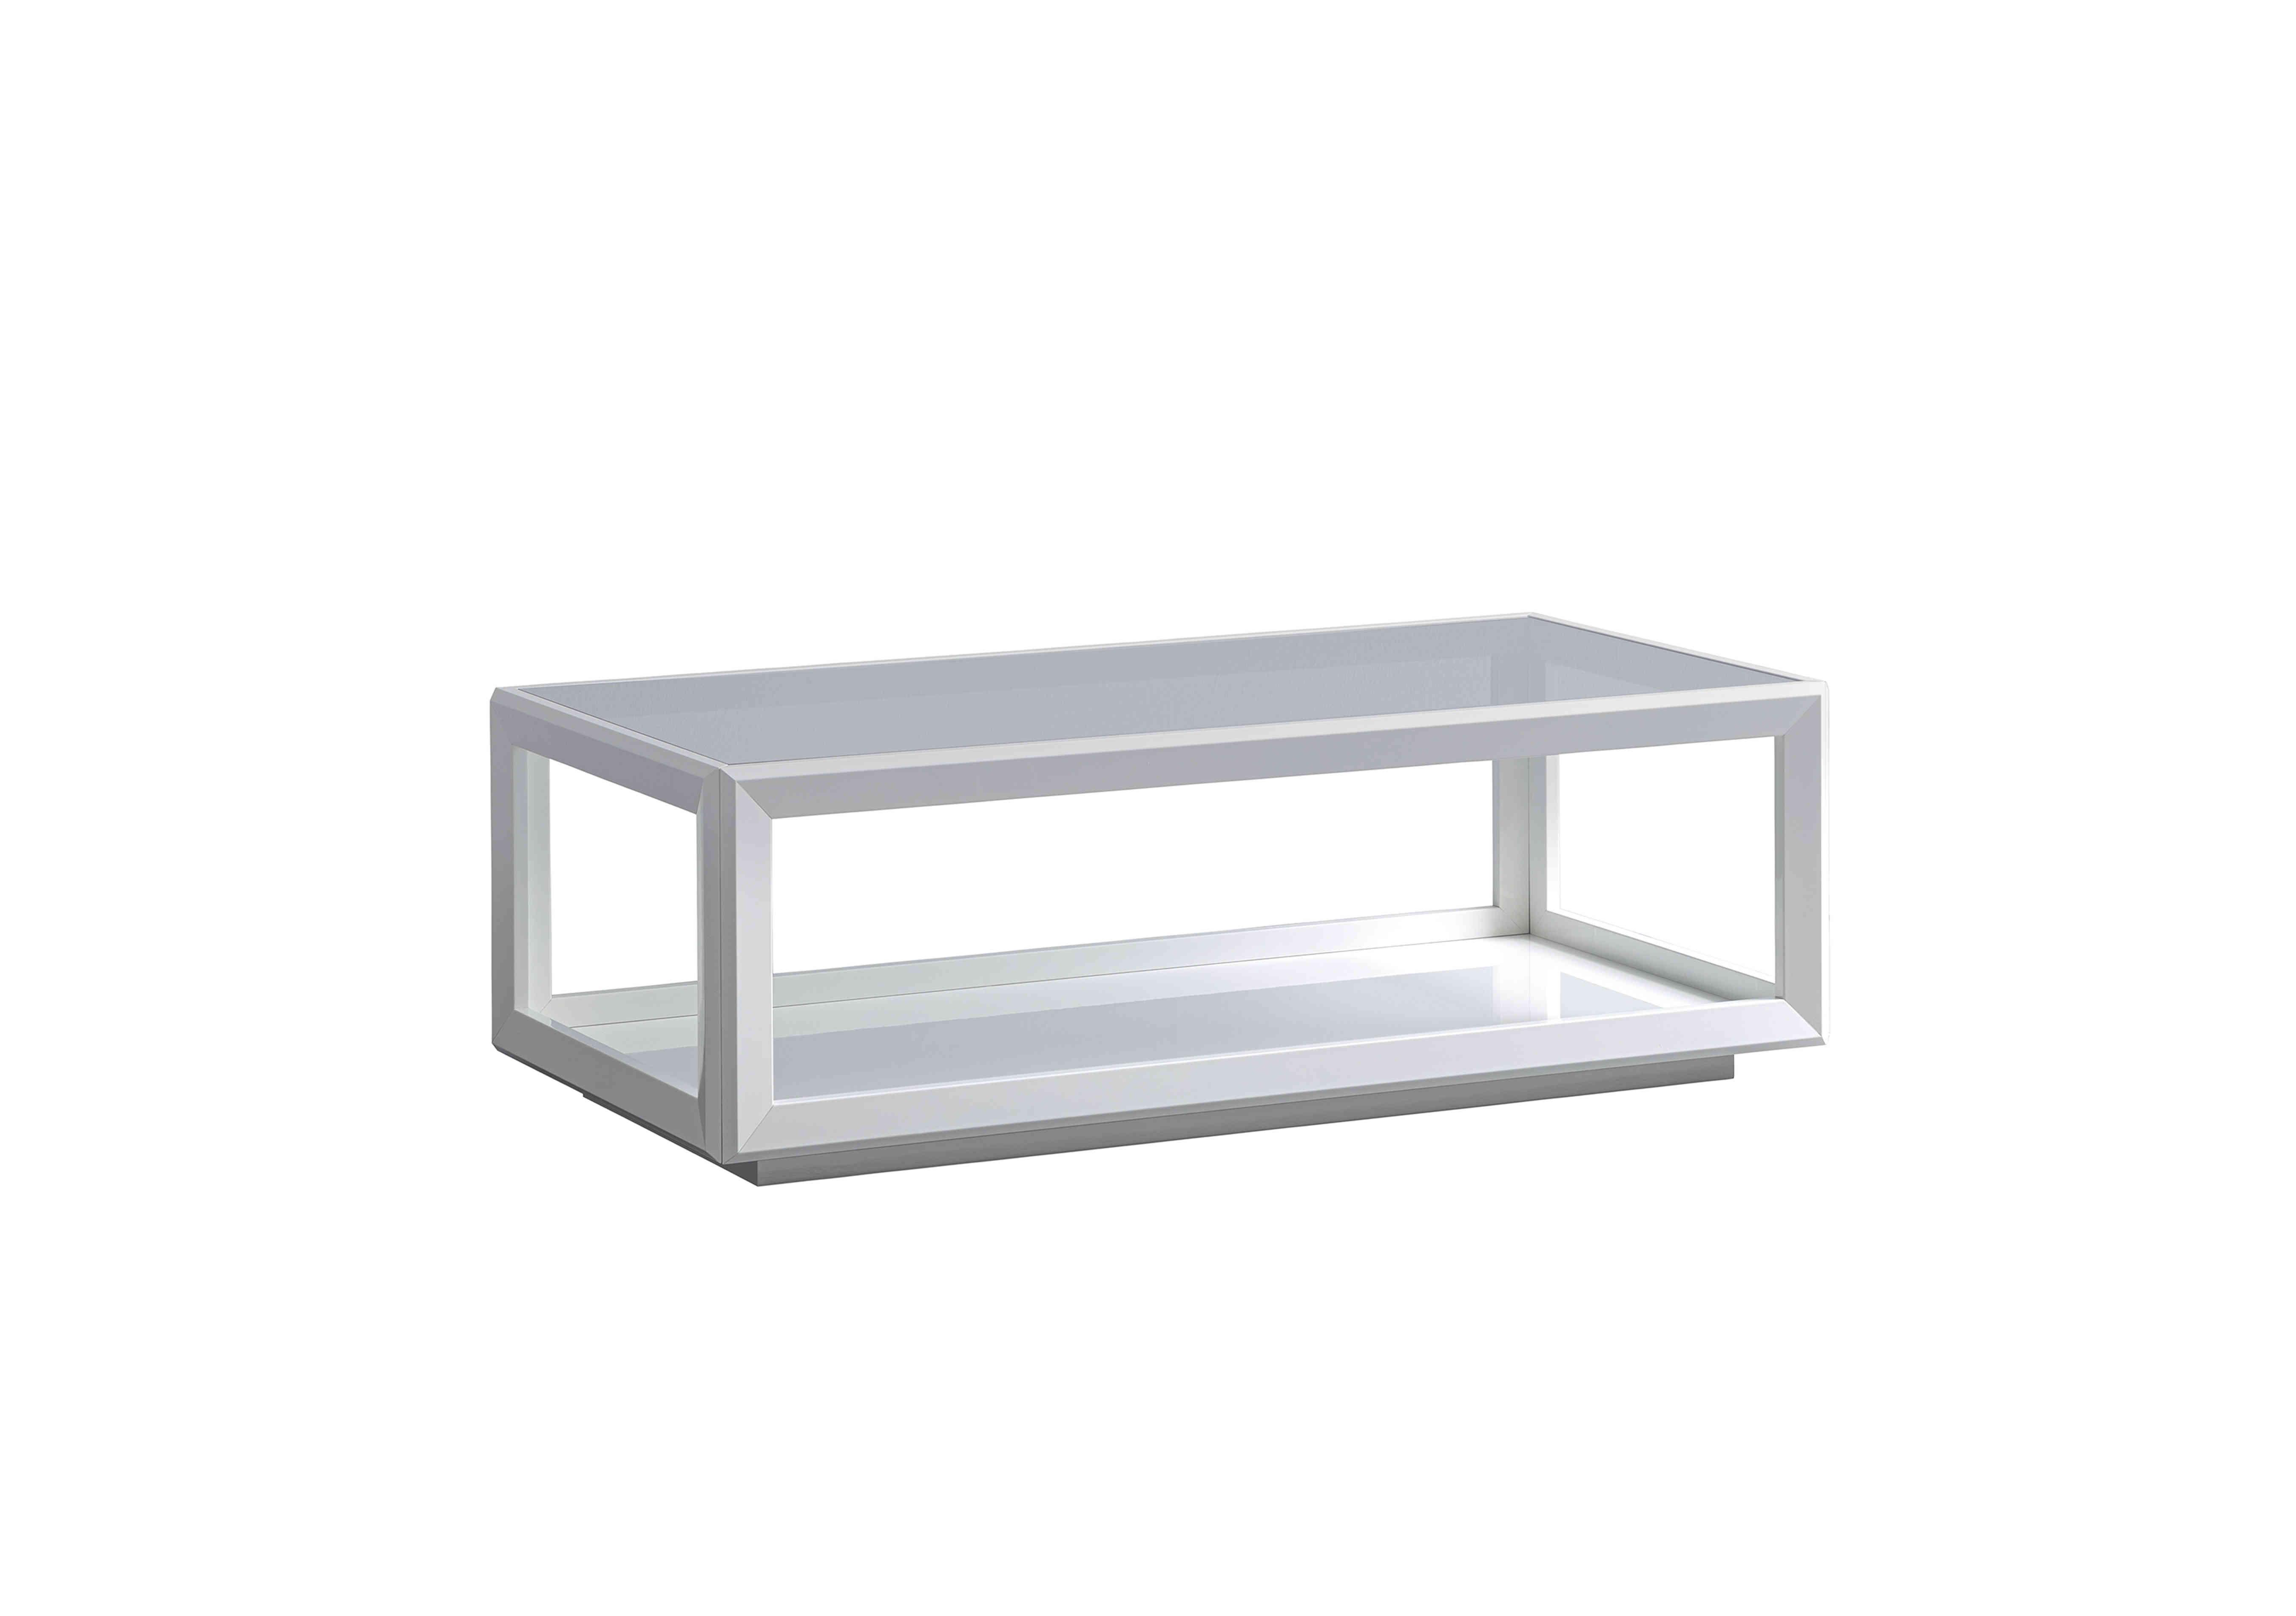 Palazzo Rectangular Coffee Table in Glossy White on Furniture Village